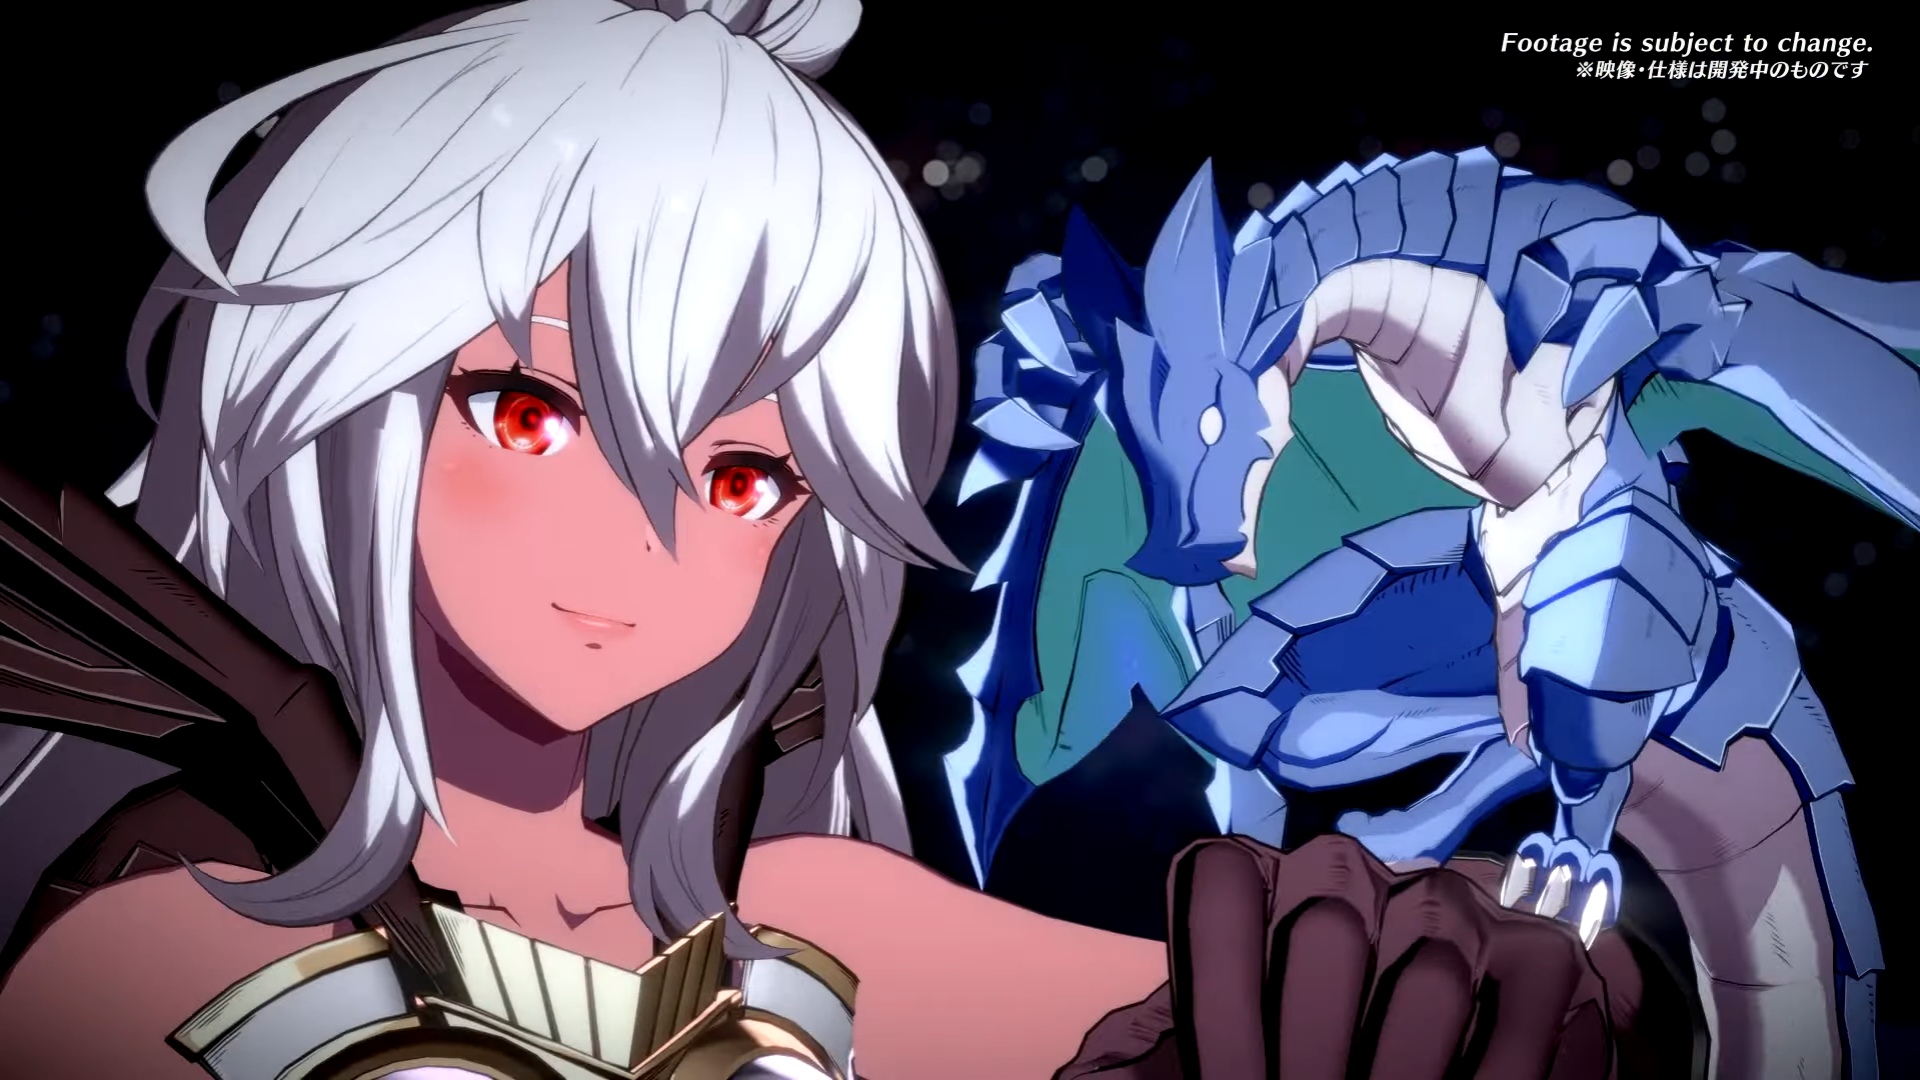 Granblue Fantasy Versus DLC Character Zooey to Release in Late April